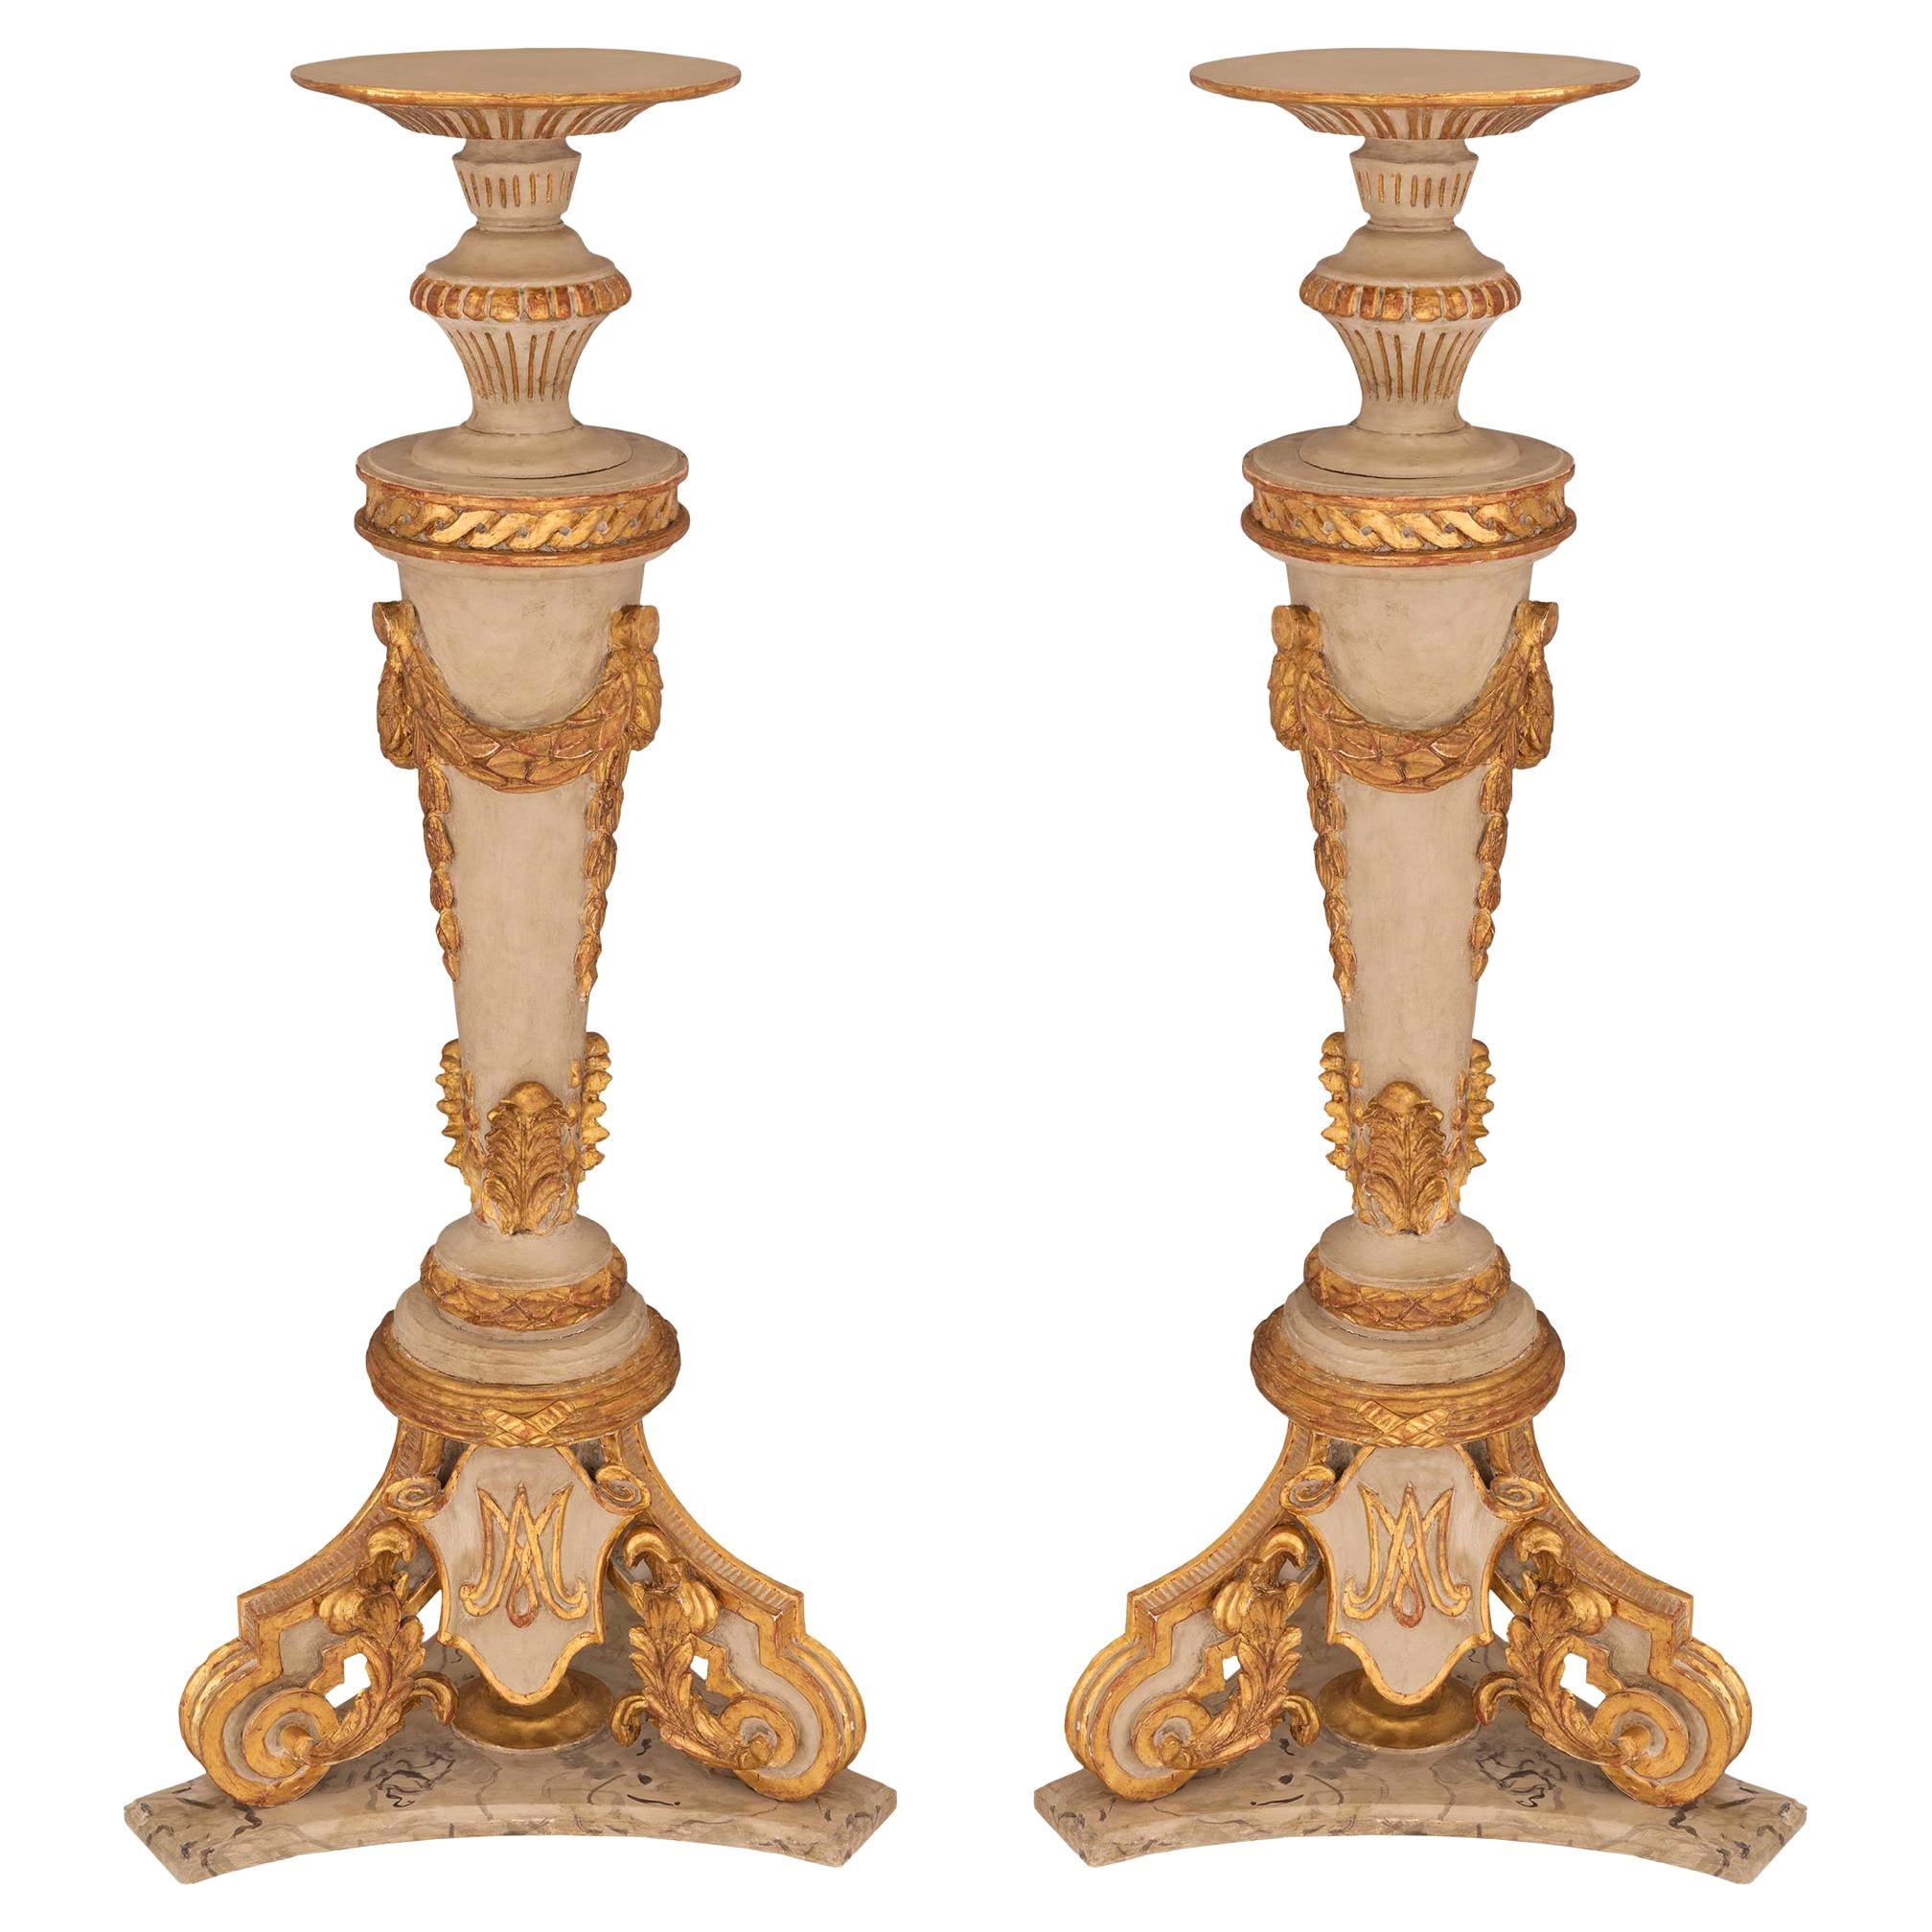 Pair of Italian 18th Century Louis XVI Period Patinated and Gilt Torchieres For Sale